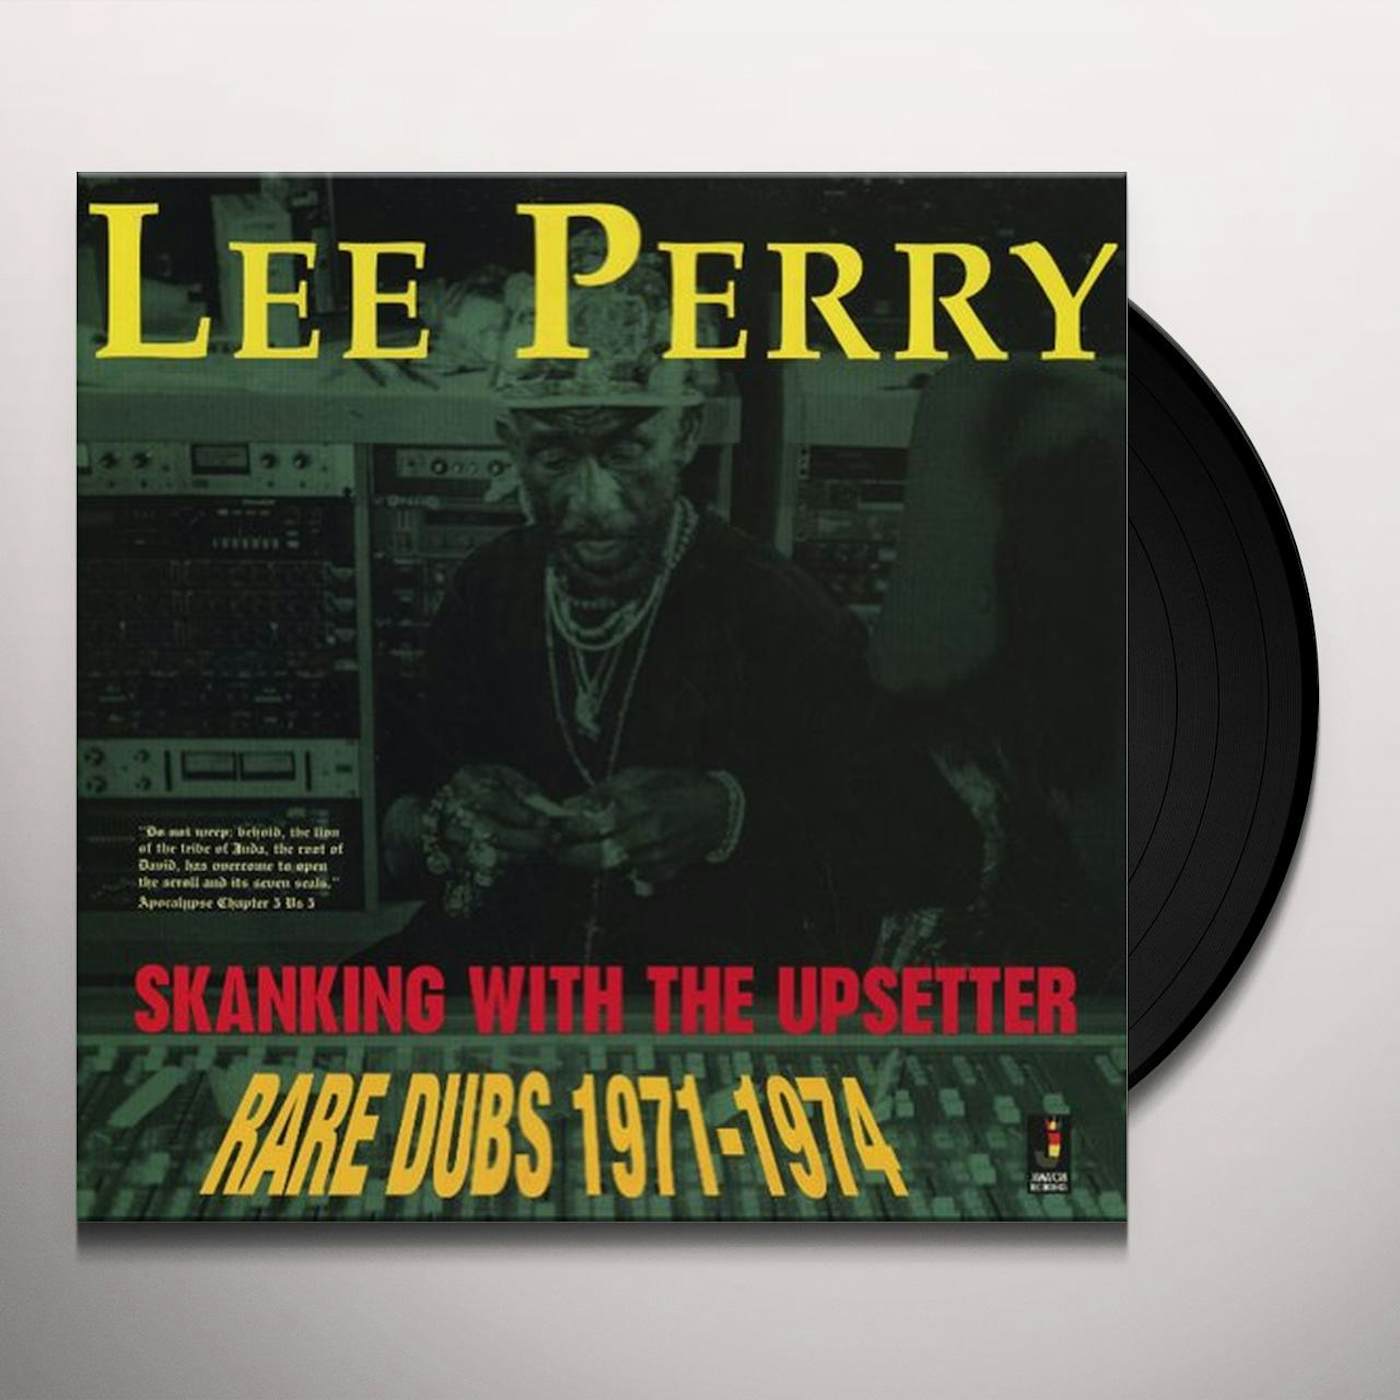 LEE PERRY - SKANKING WITH THE UPSETTER “RARE DUBS 1971- 1974 [LP]